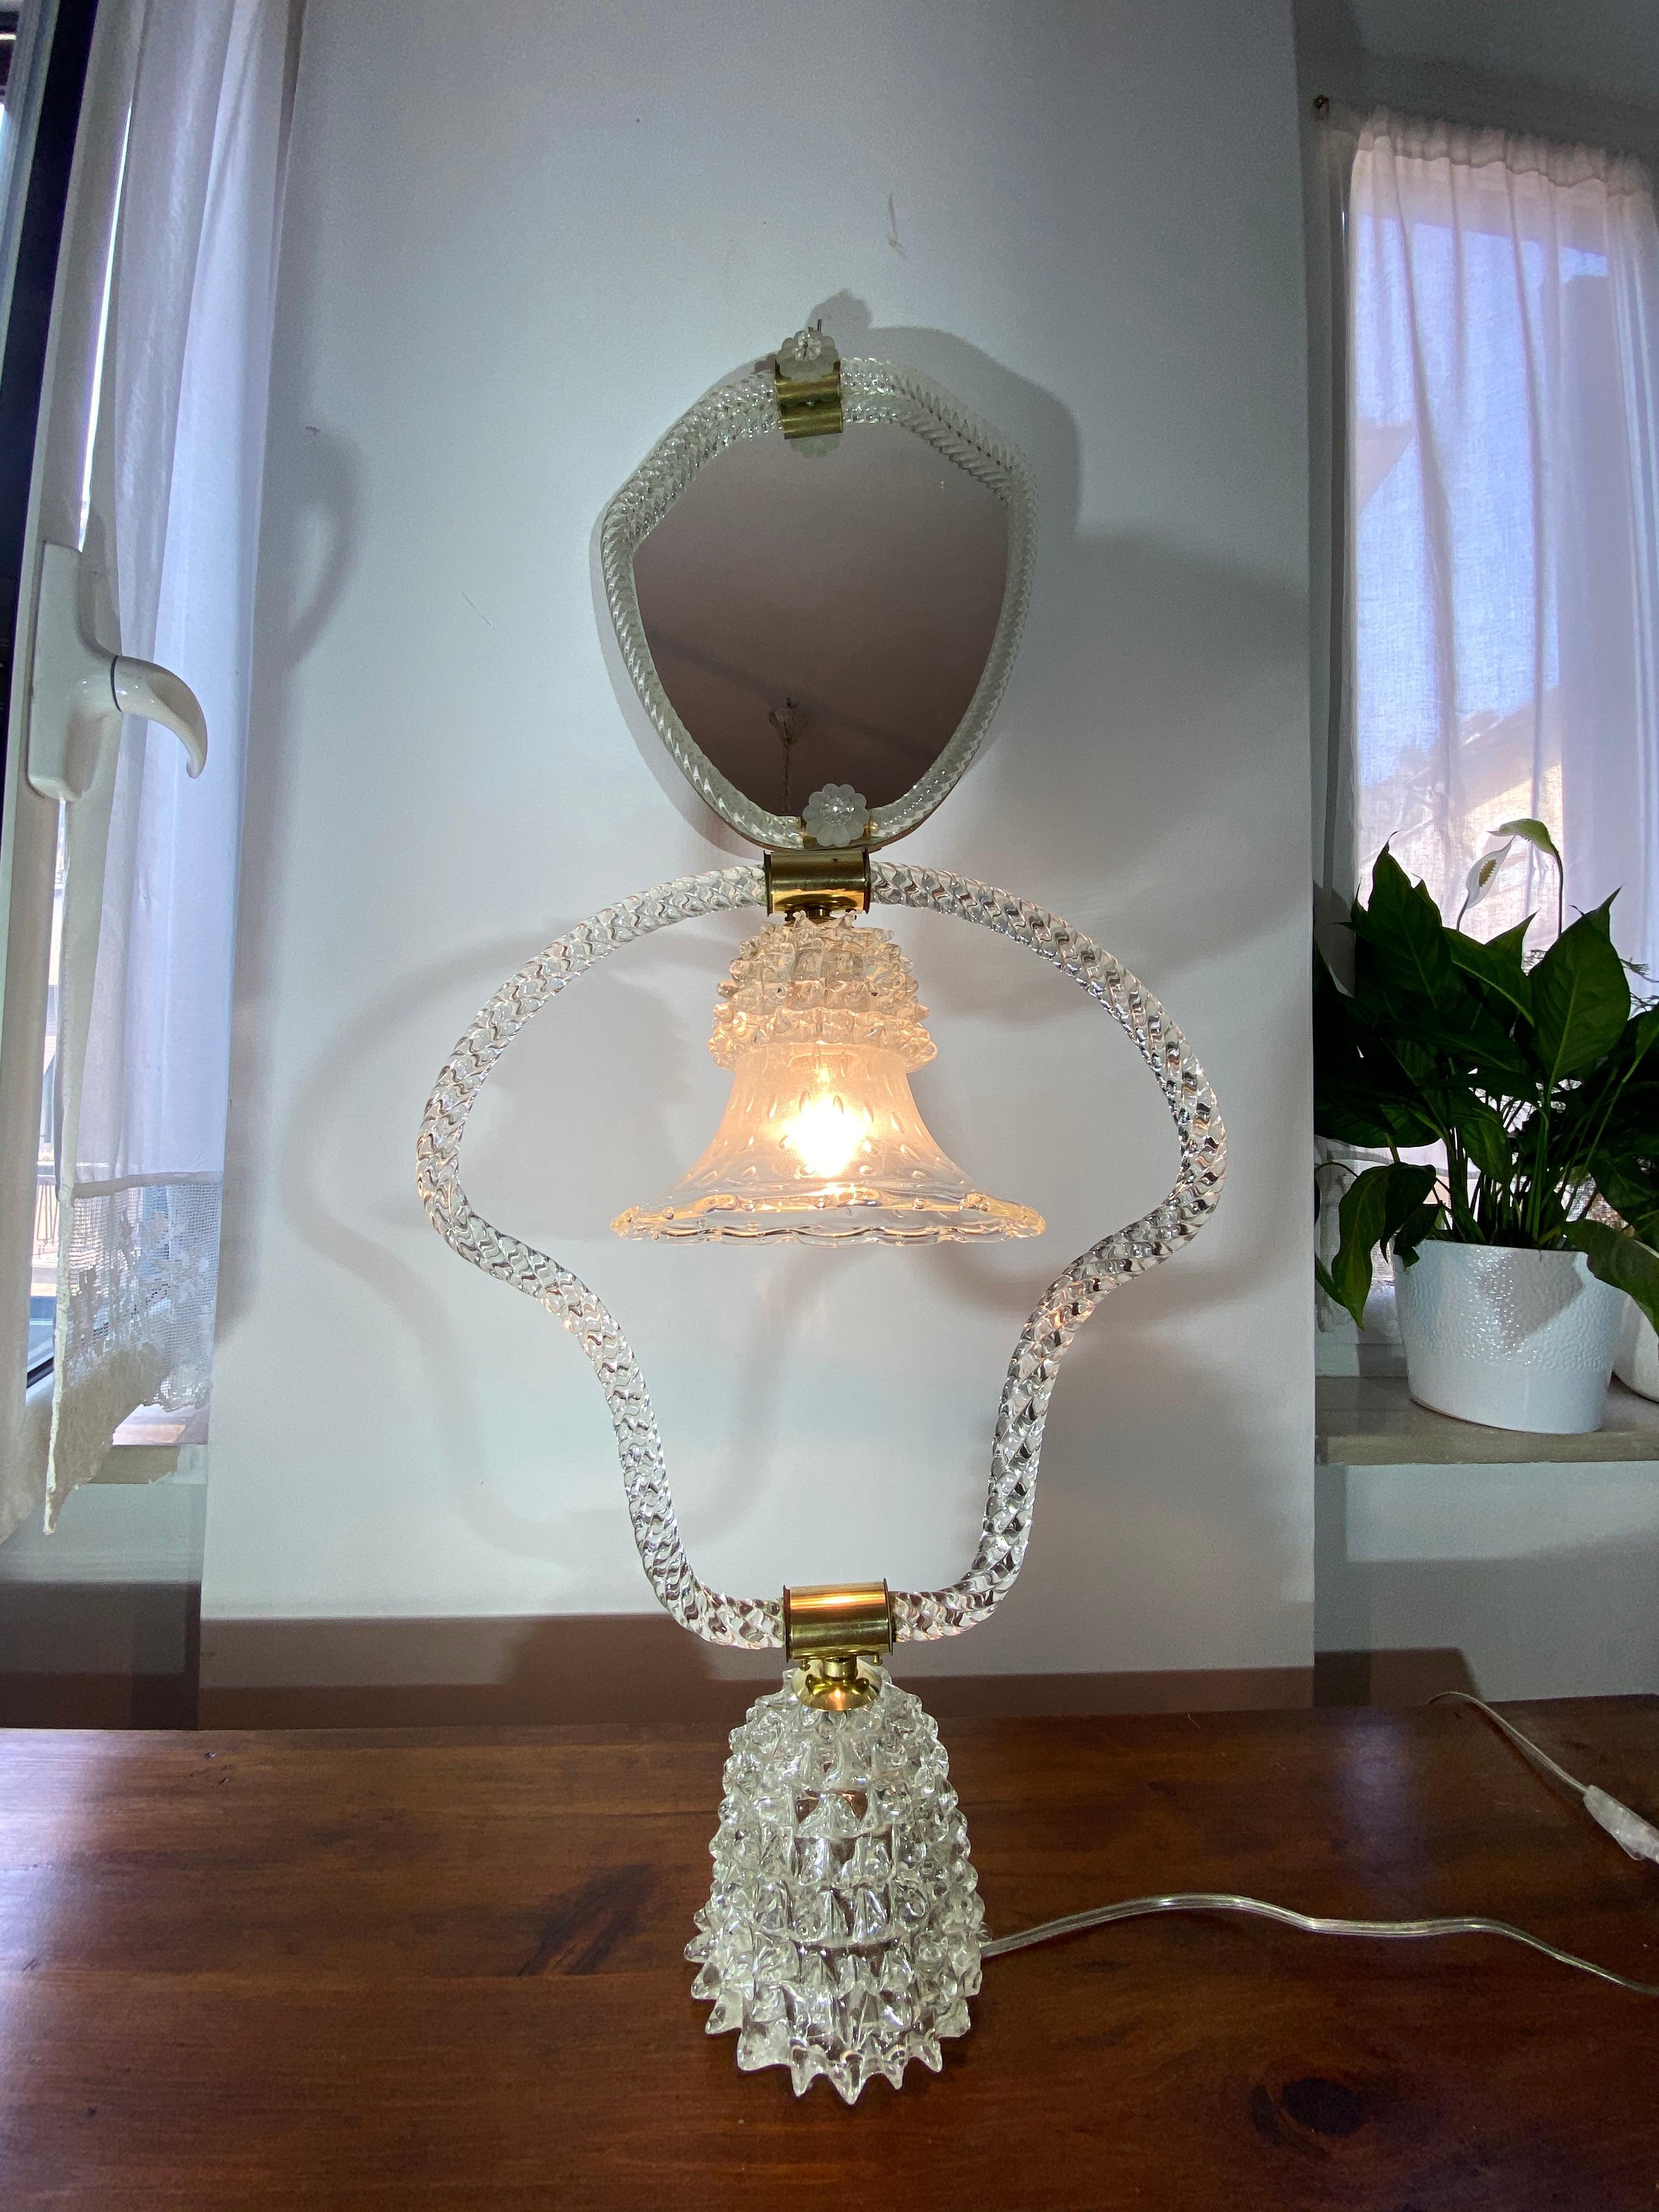 Art Deco Table Lamp by Ercole Barovier, Murano, 1940s For Sale 11